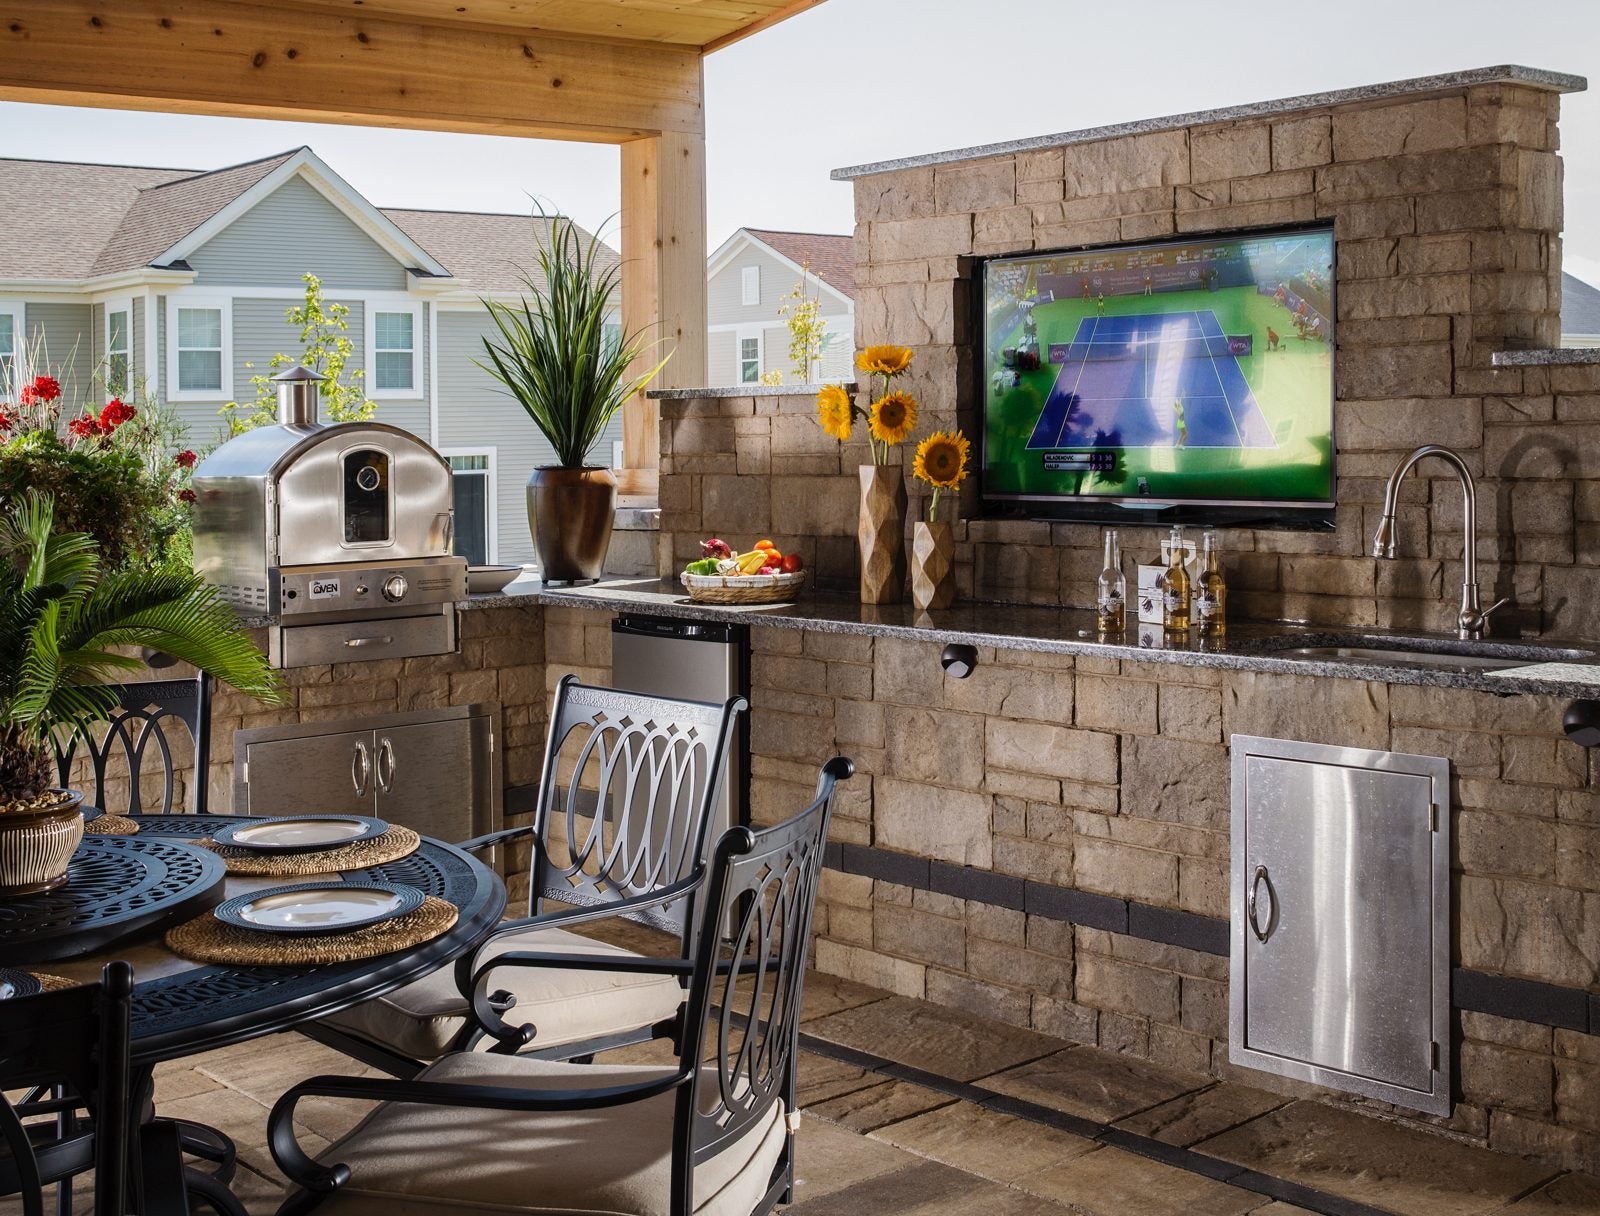 Built-in Outdoor Grill Design with TV